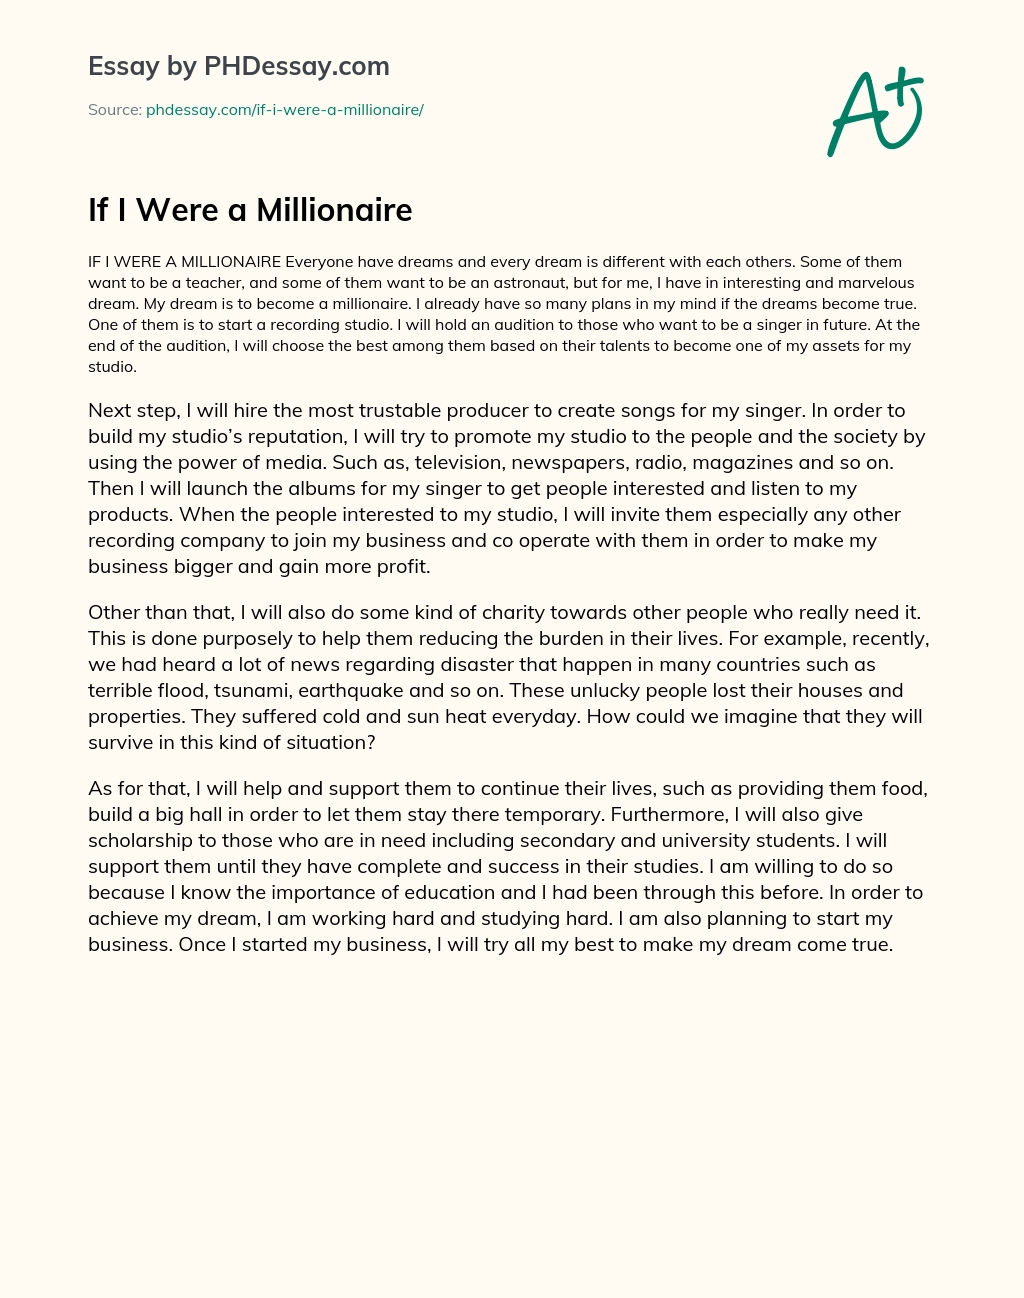 essay on if i were a millionaire for class 6